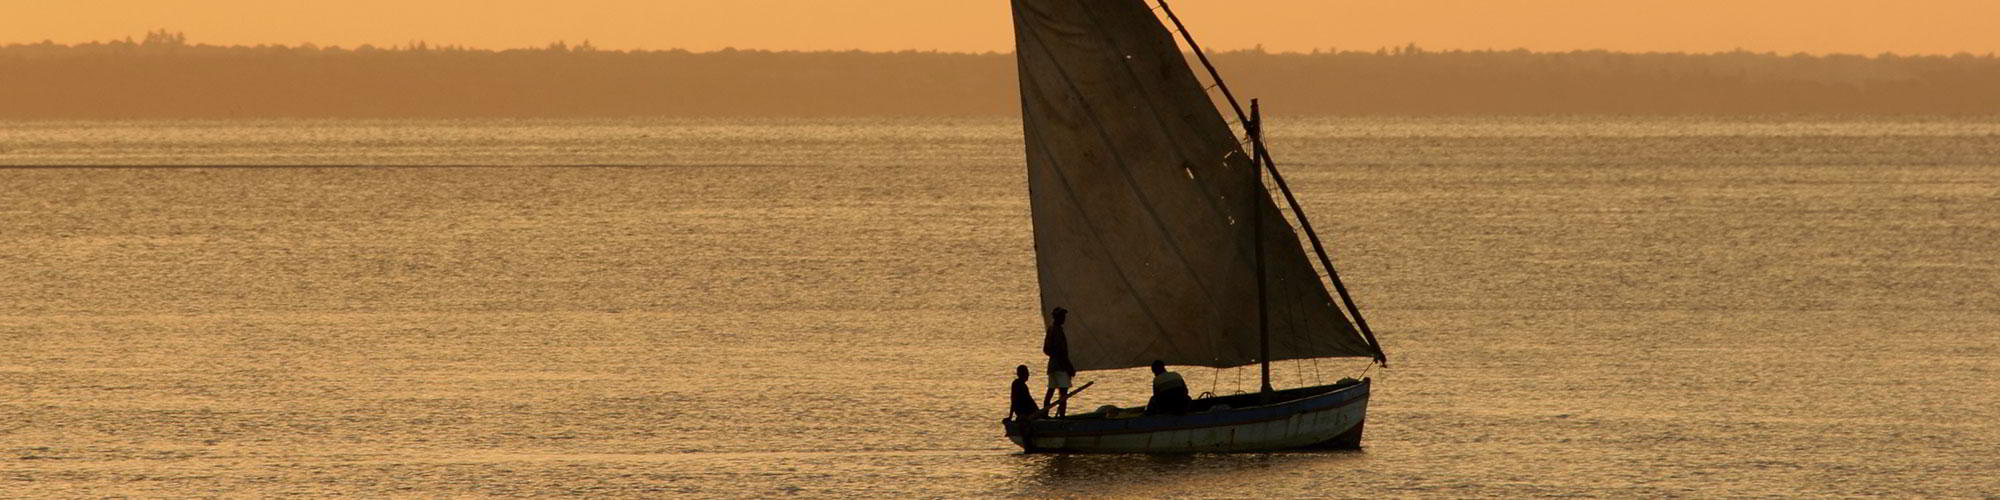 Journeys to Mozambique